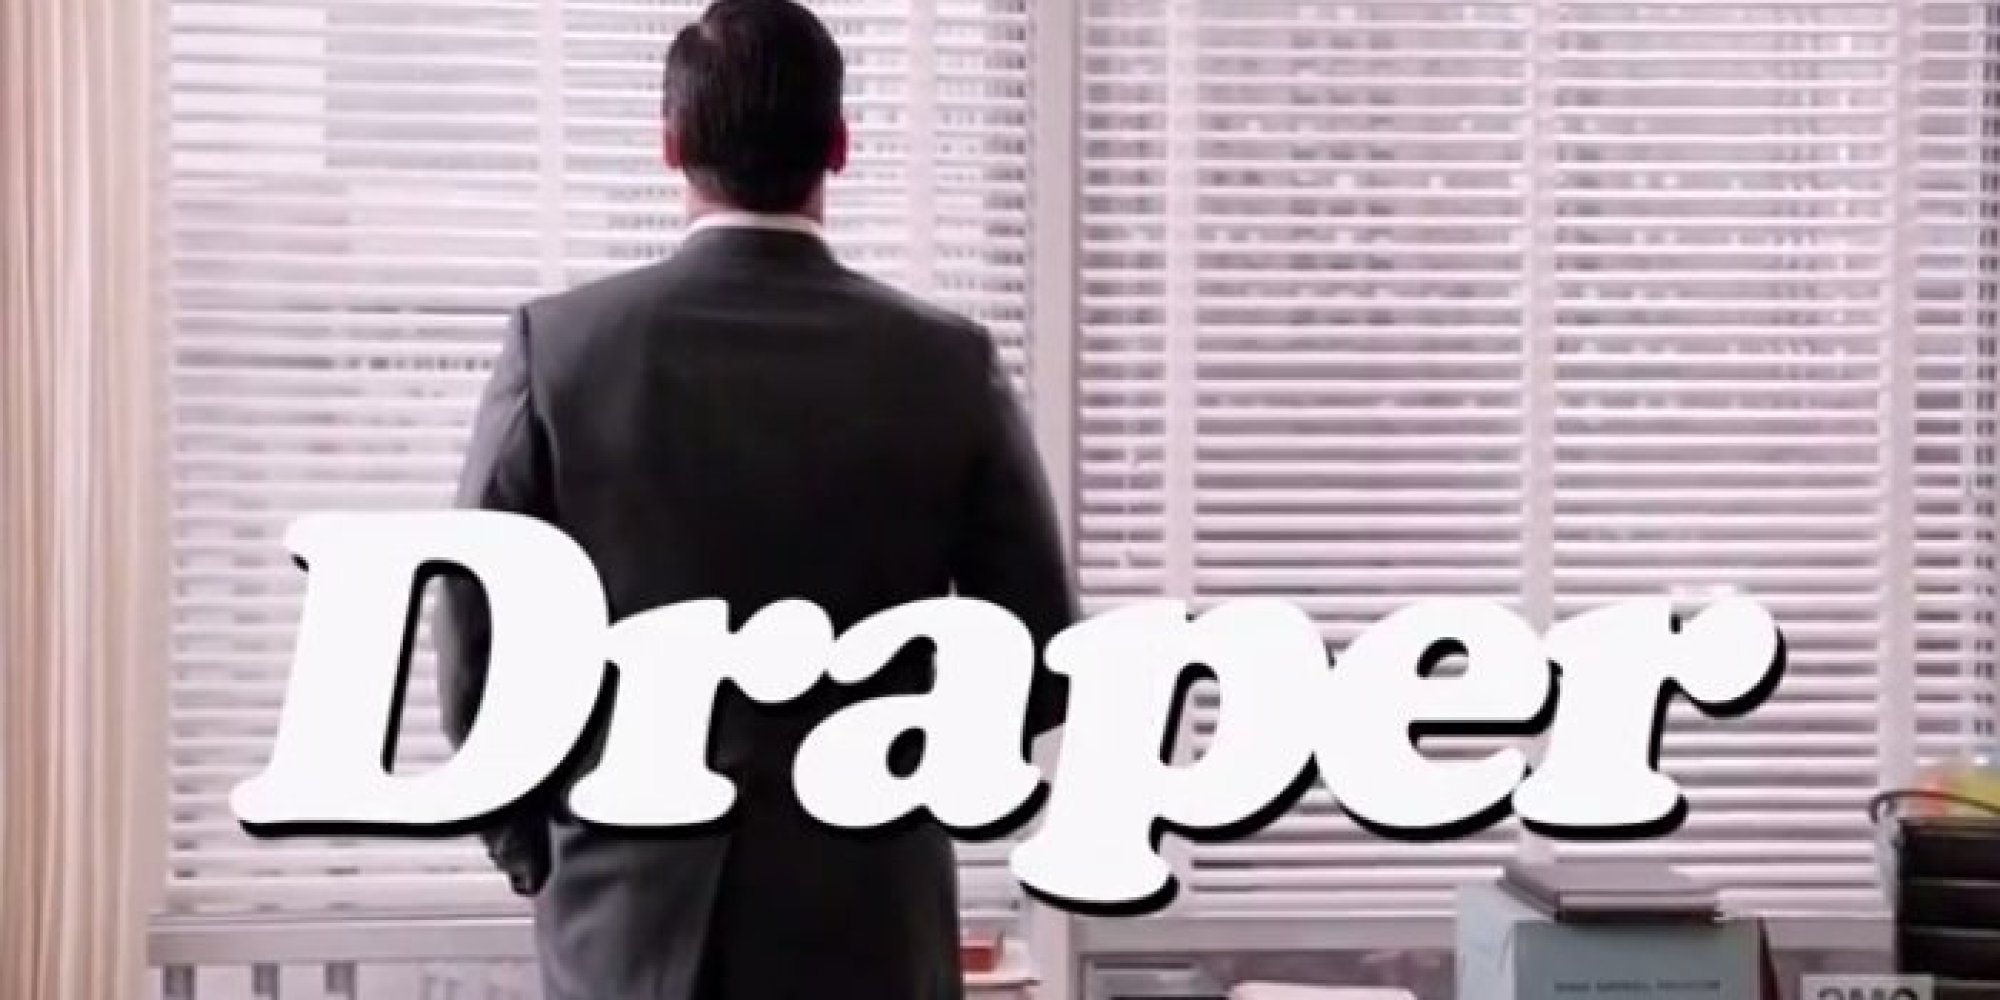 Someone FINALLY Mashed Up 'Mad Men' & 'Benson' It Took You Long